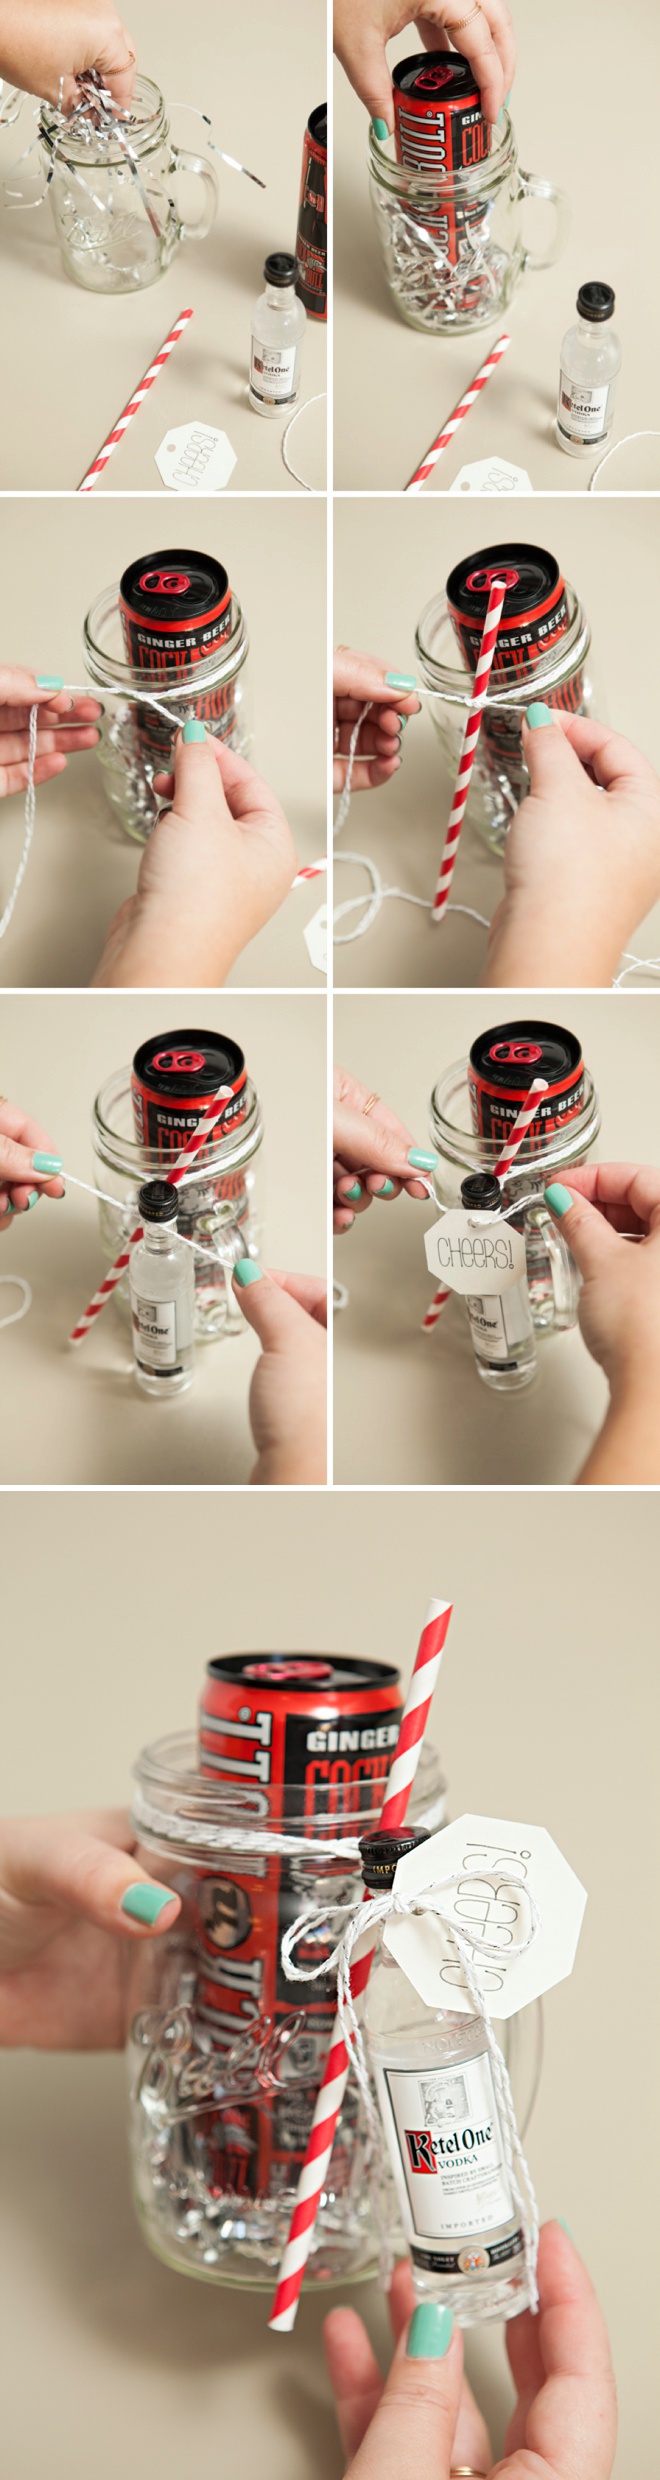 How to make your own mason jar cocktail gifts, best gifts ever!